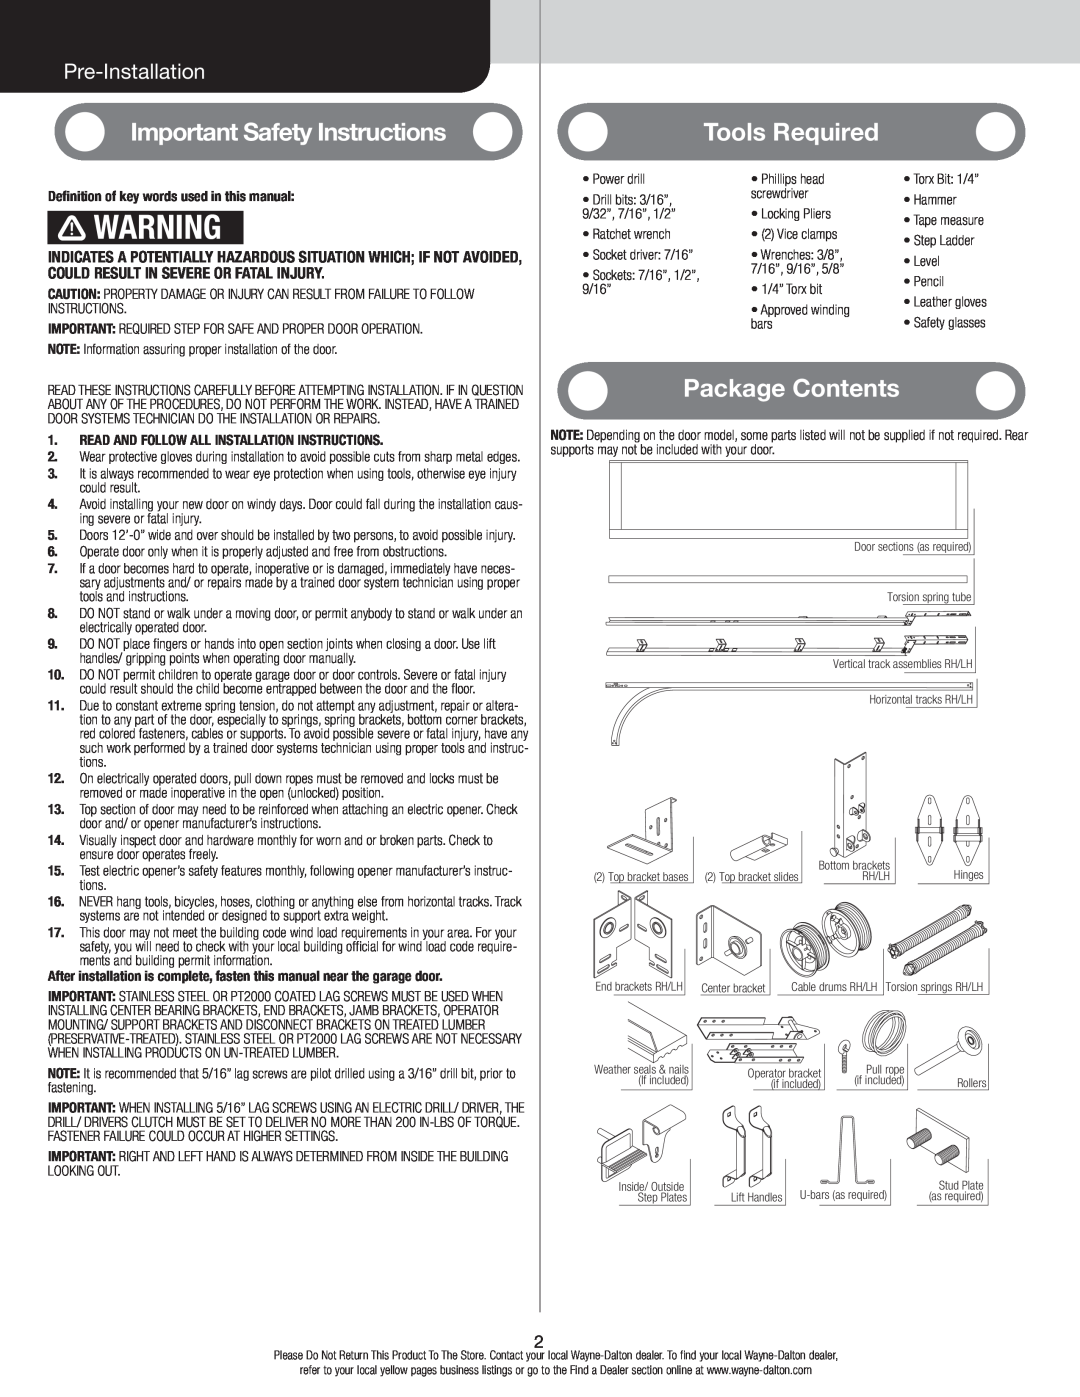 Wayne-Dalton 8300, 8500 Important Safety Instructions, Tools Required, Package Contents, Pre-Installation 